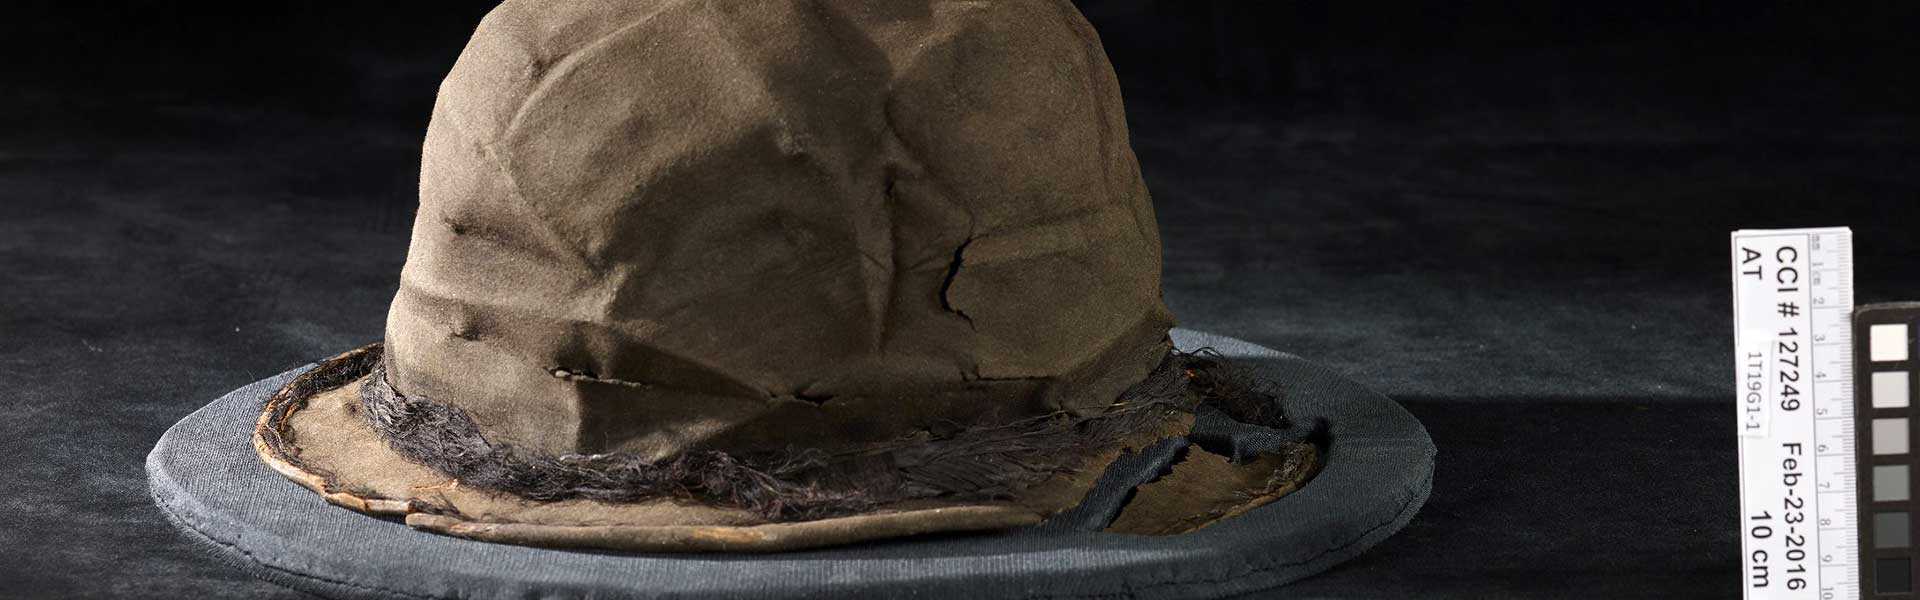 Bowler hat found at First Parliament Site, Toronto